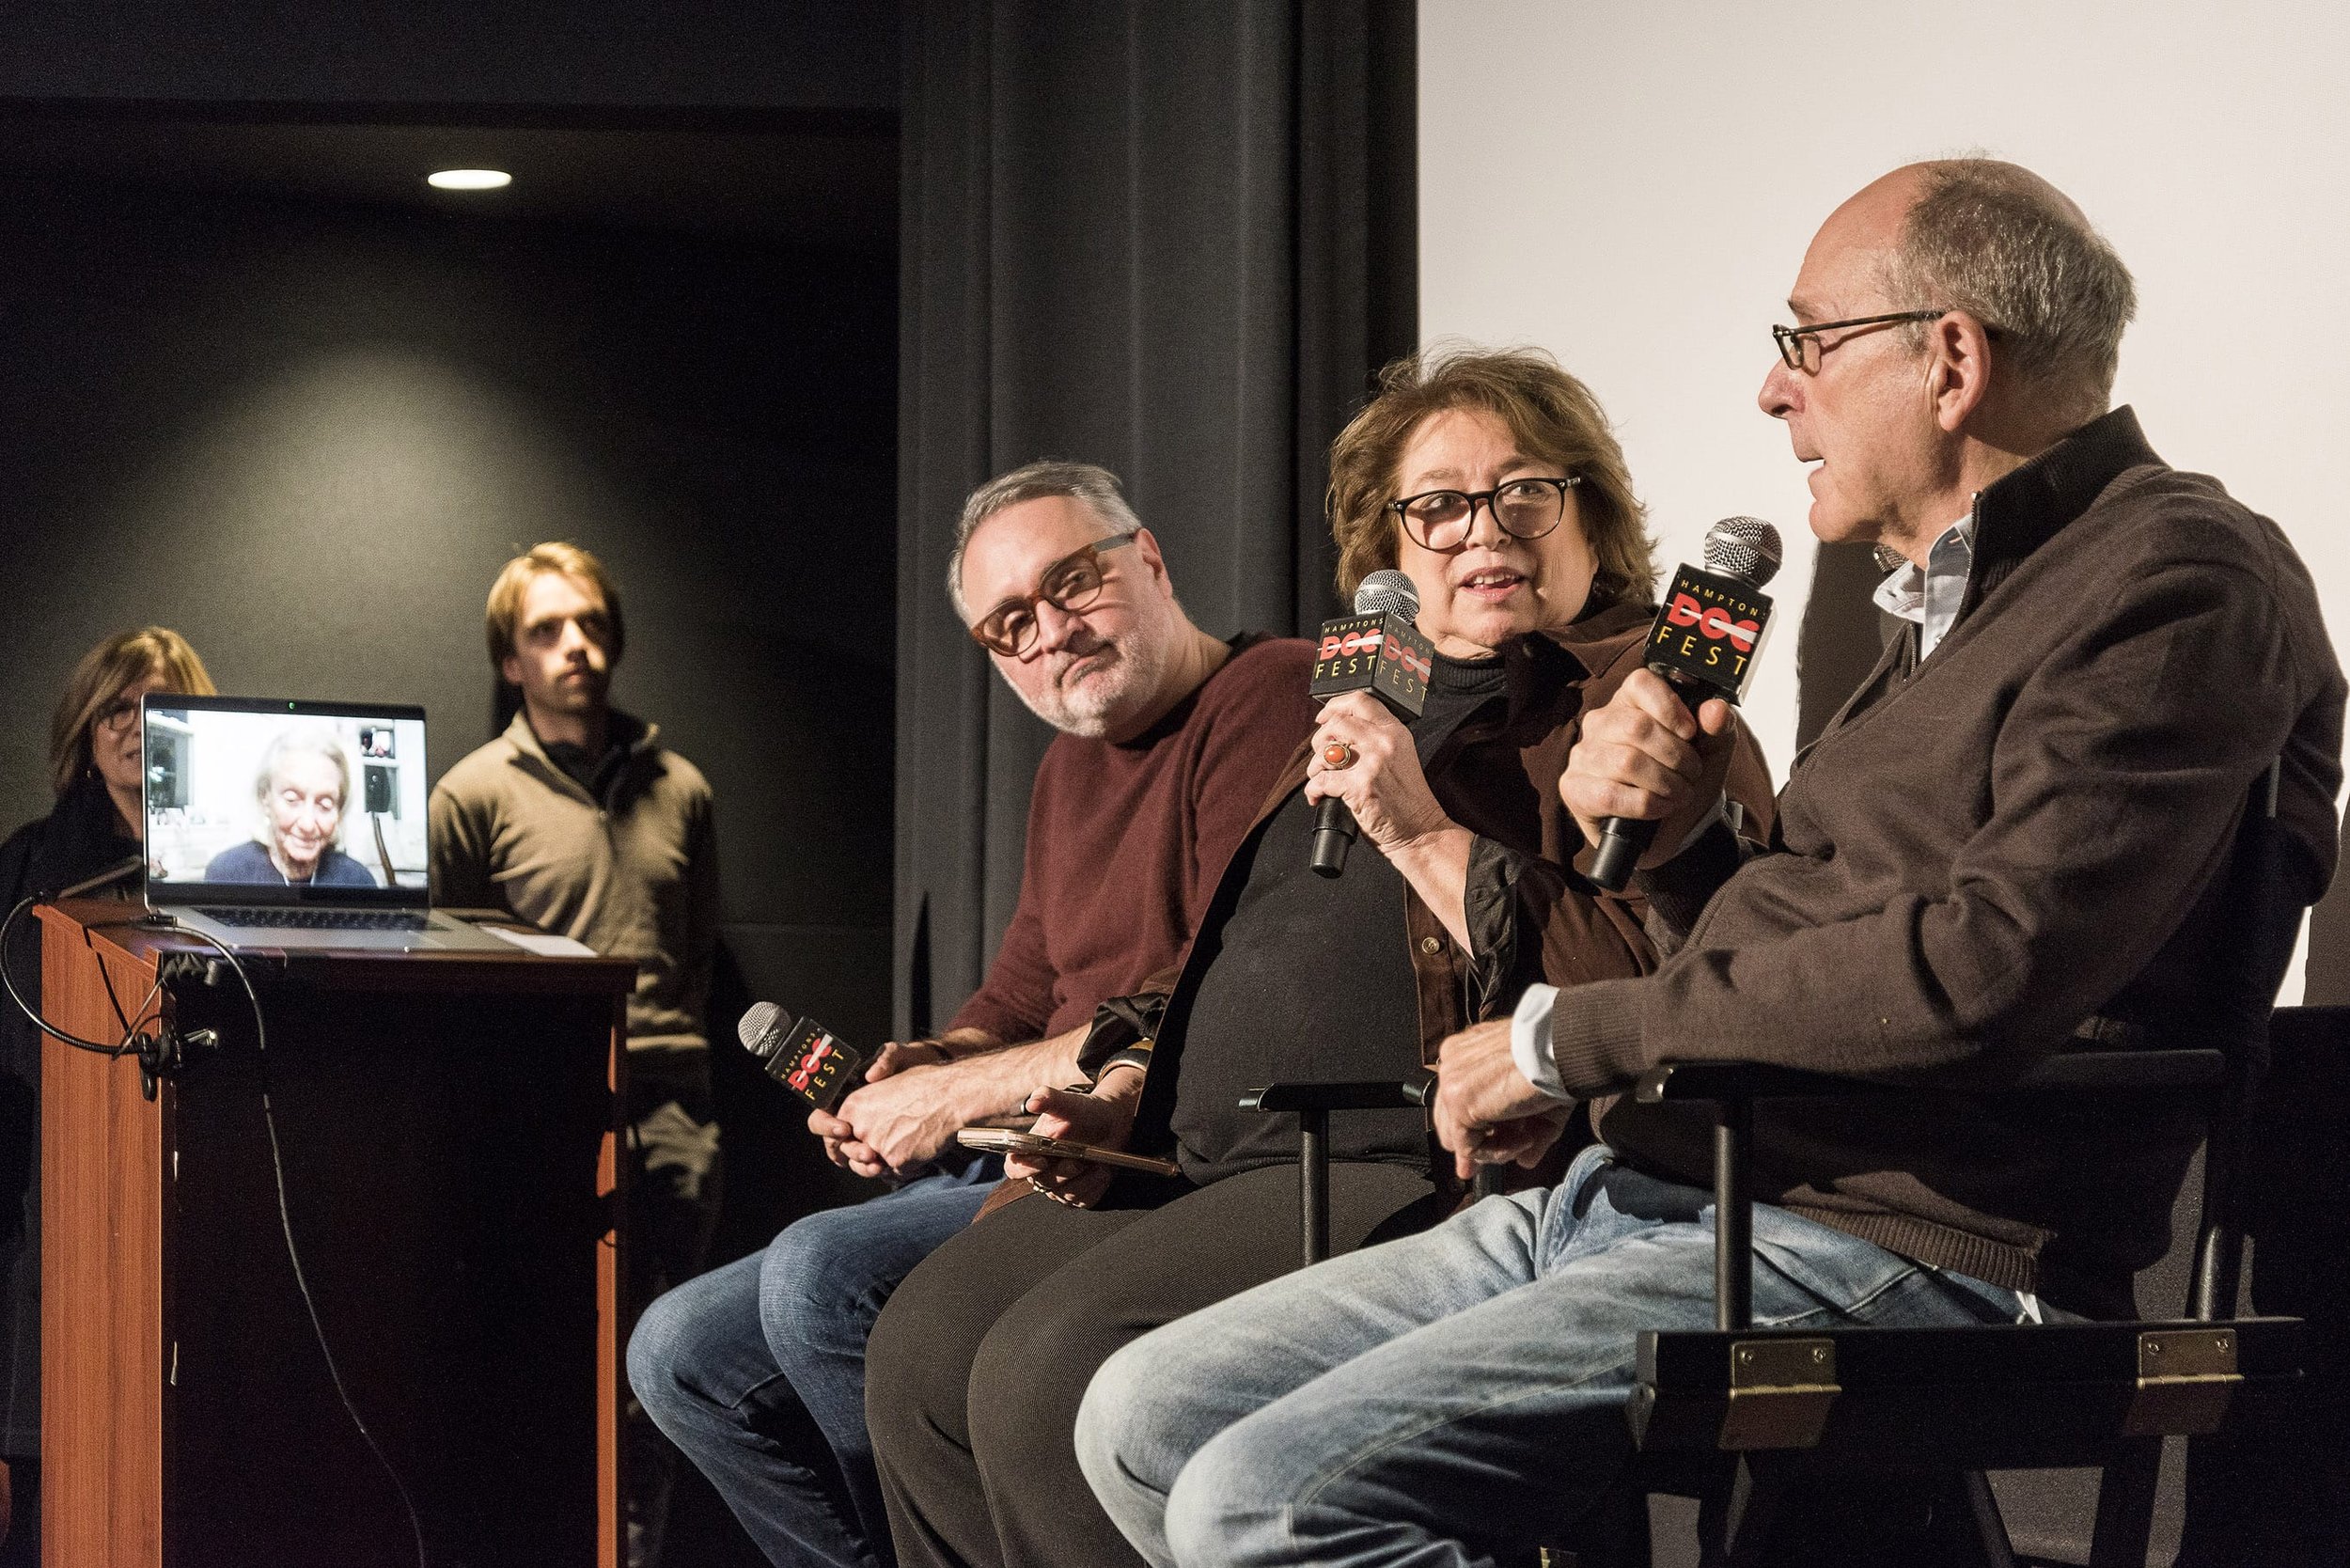 James Lapine, Susan Lacy, Miky Wolf